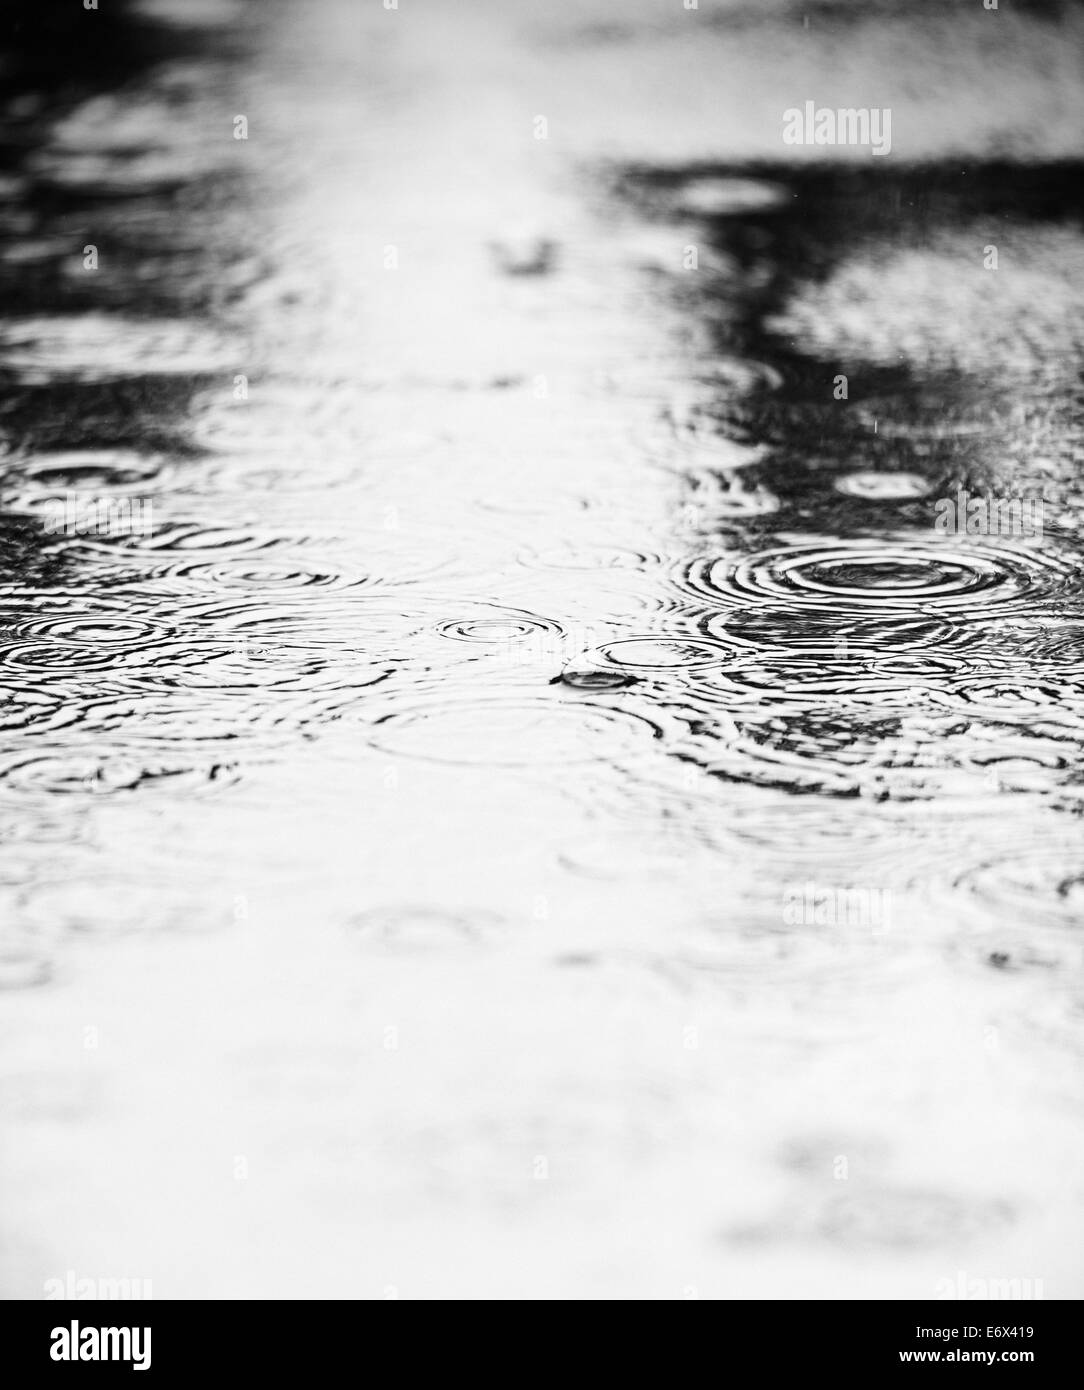 Close up of water puddle with rain drops falling Stock Photo